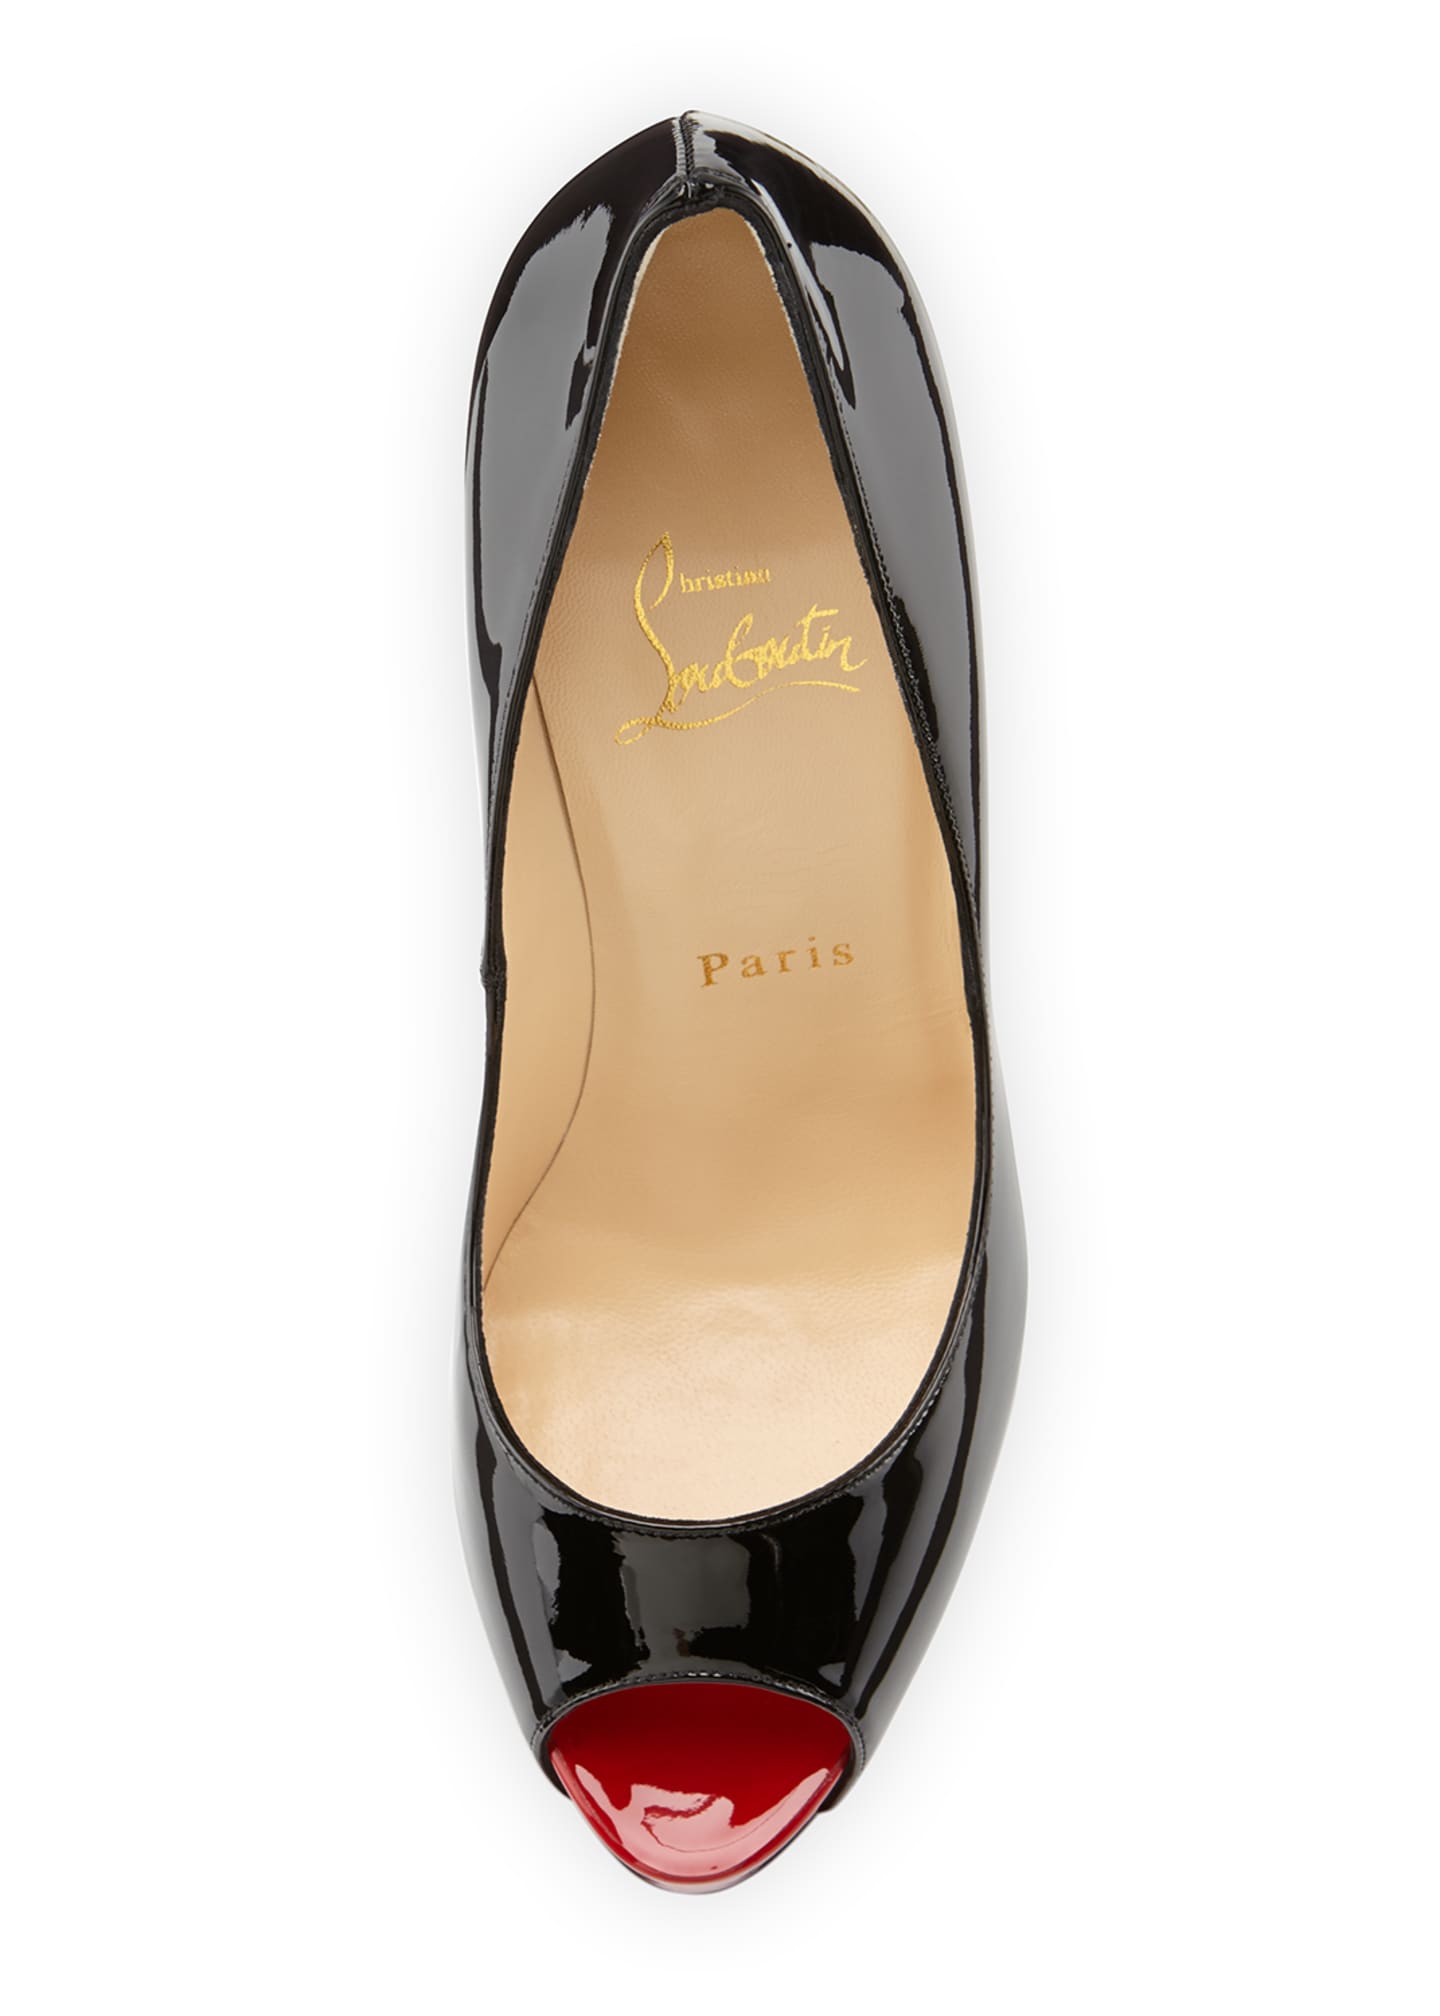 Shop authentic Christian Louboutin New Very Prive Pumps at revogue for just  USD 510.00